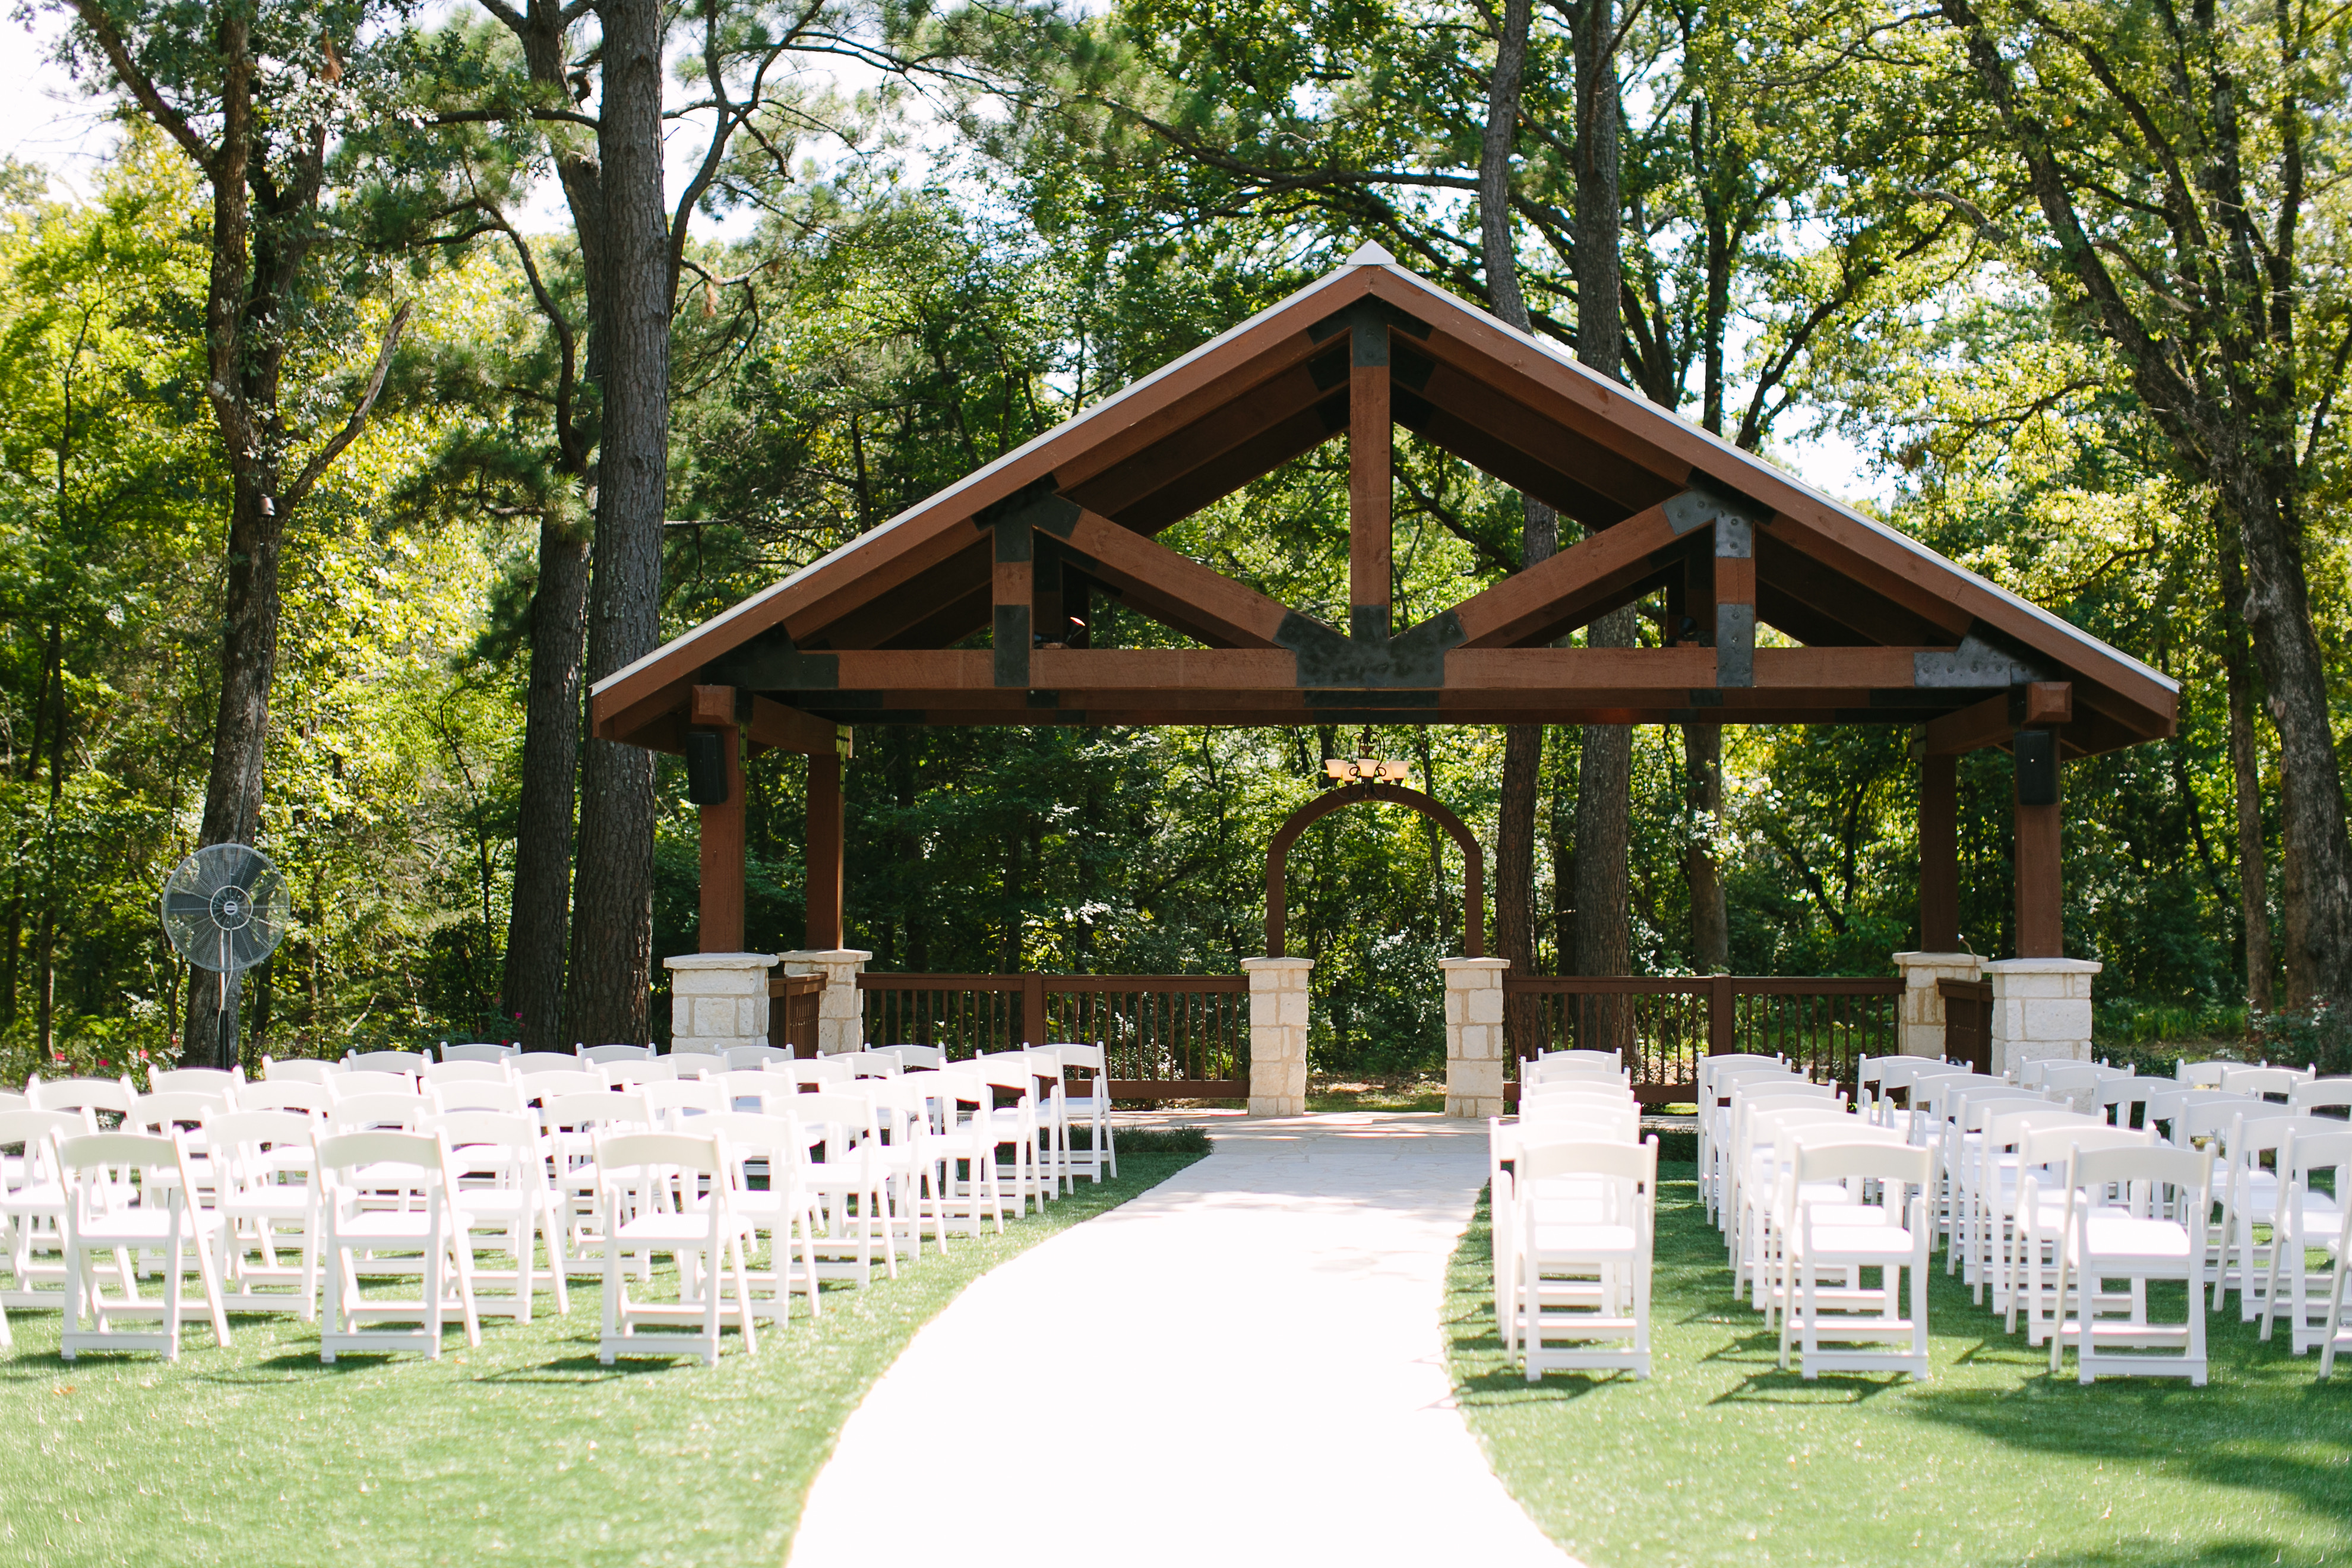 An outdoor wedding venue with white chairs and a wood arbor